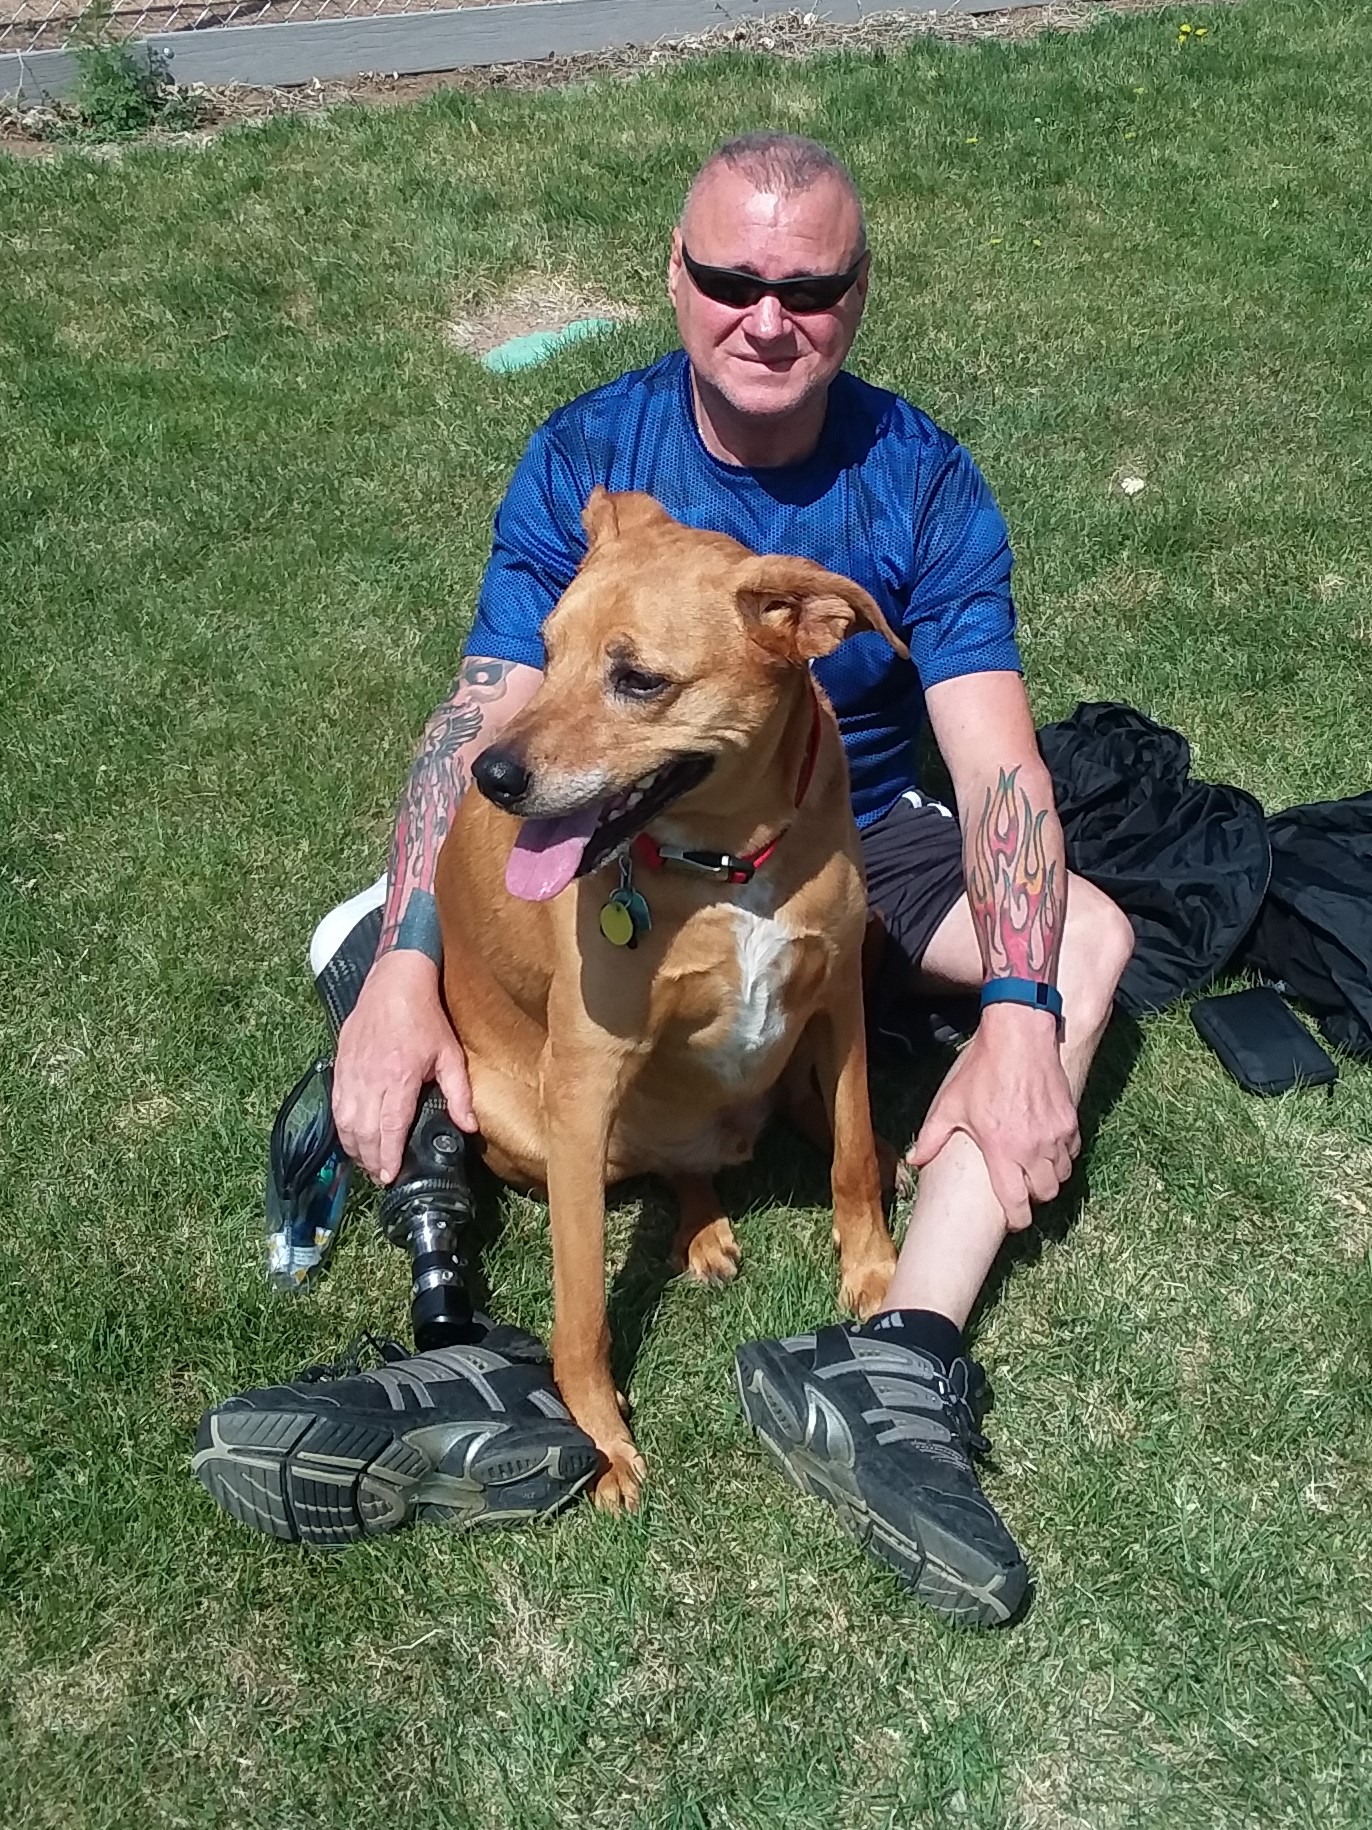 Male sitting on the ground with right leg prosthetic smiling at the camera with dog sitting in between his legs